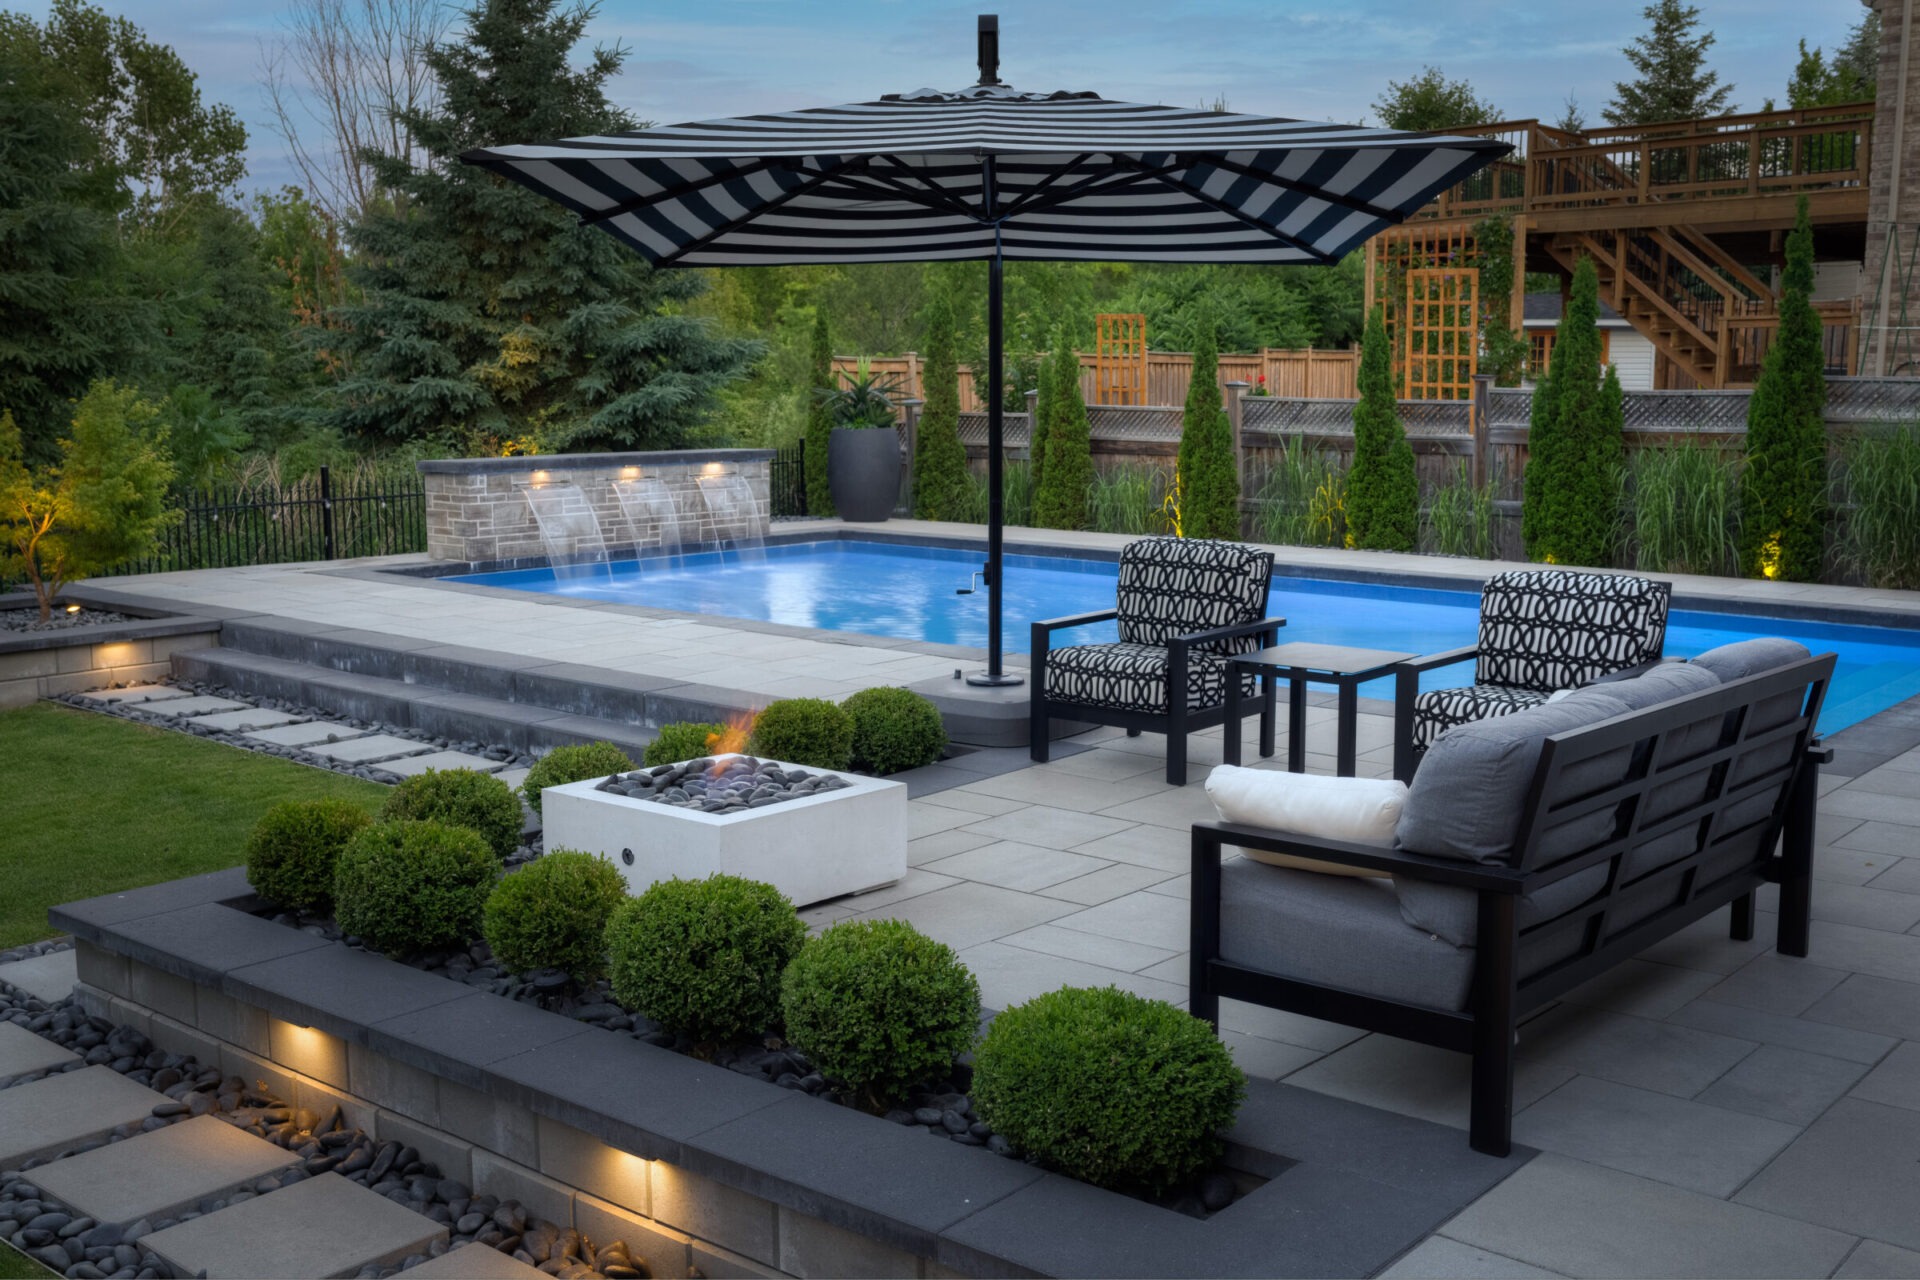 A luxurious backyard with a swimming pool, water features, stylish outdoor furniture, a striped umbrella, fire pit, manicured bushes, and a wooden deck.